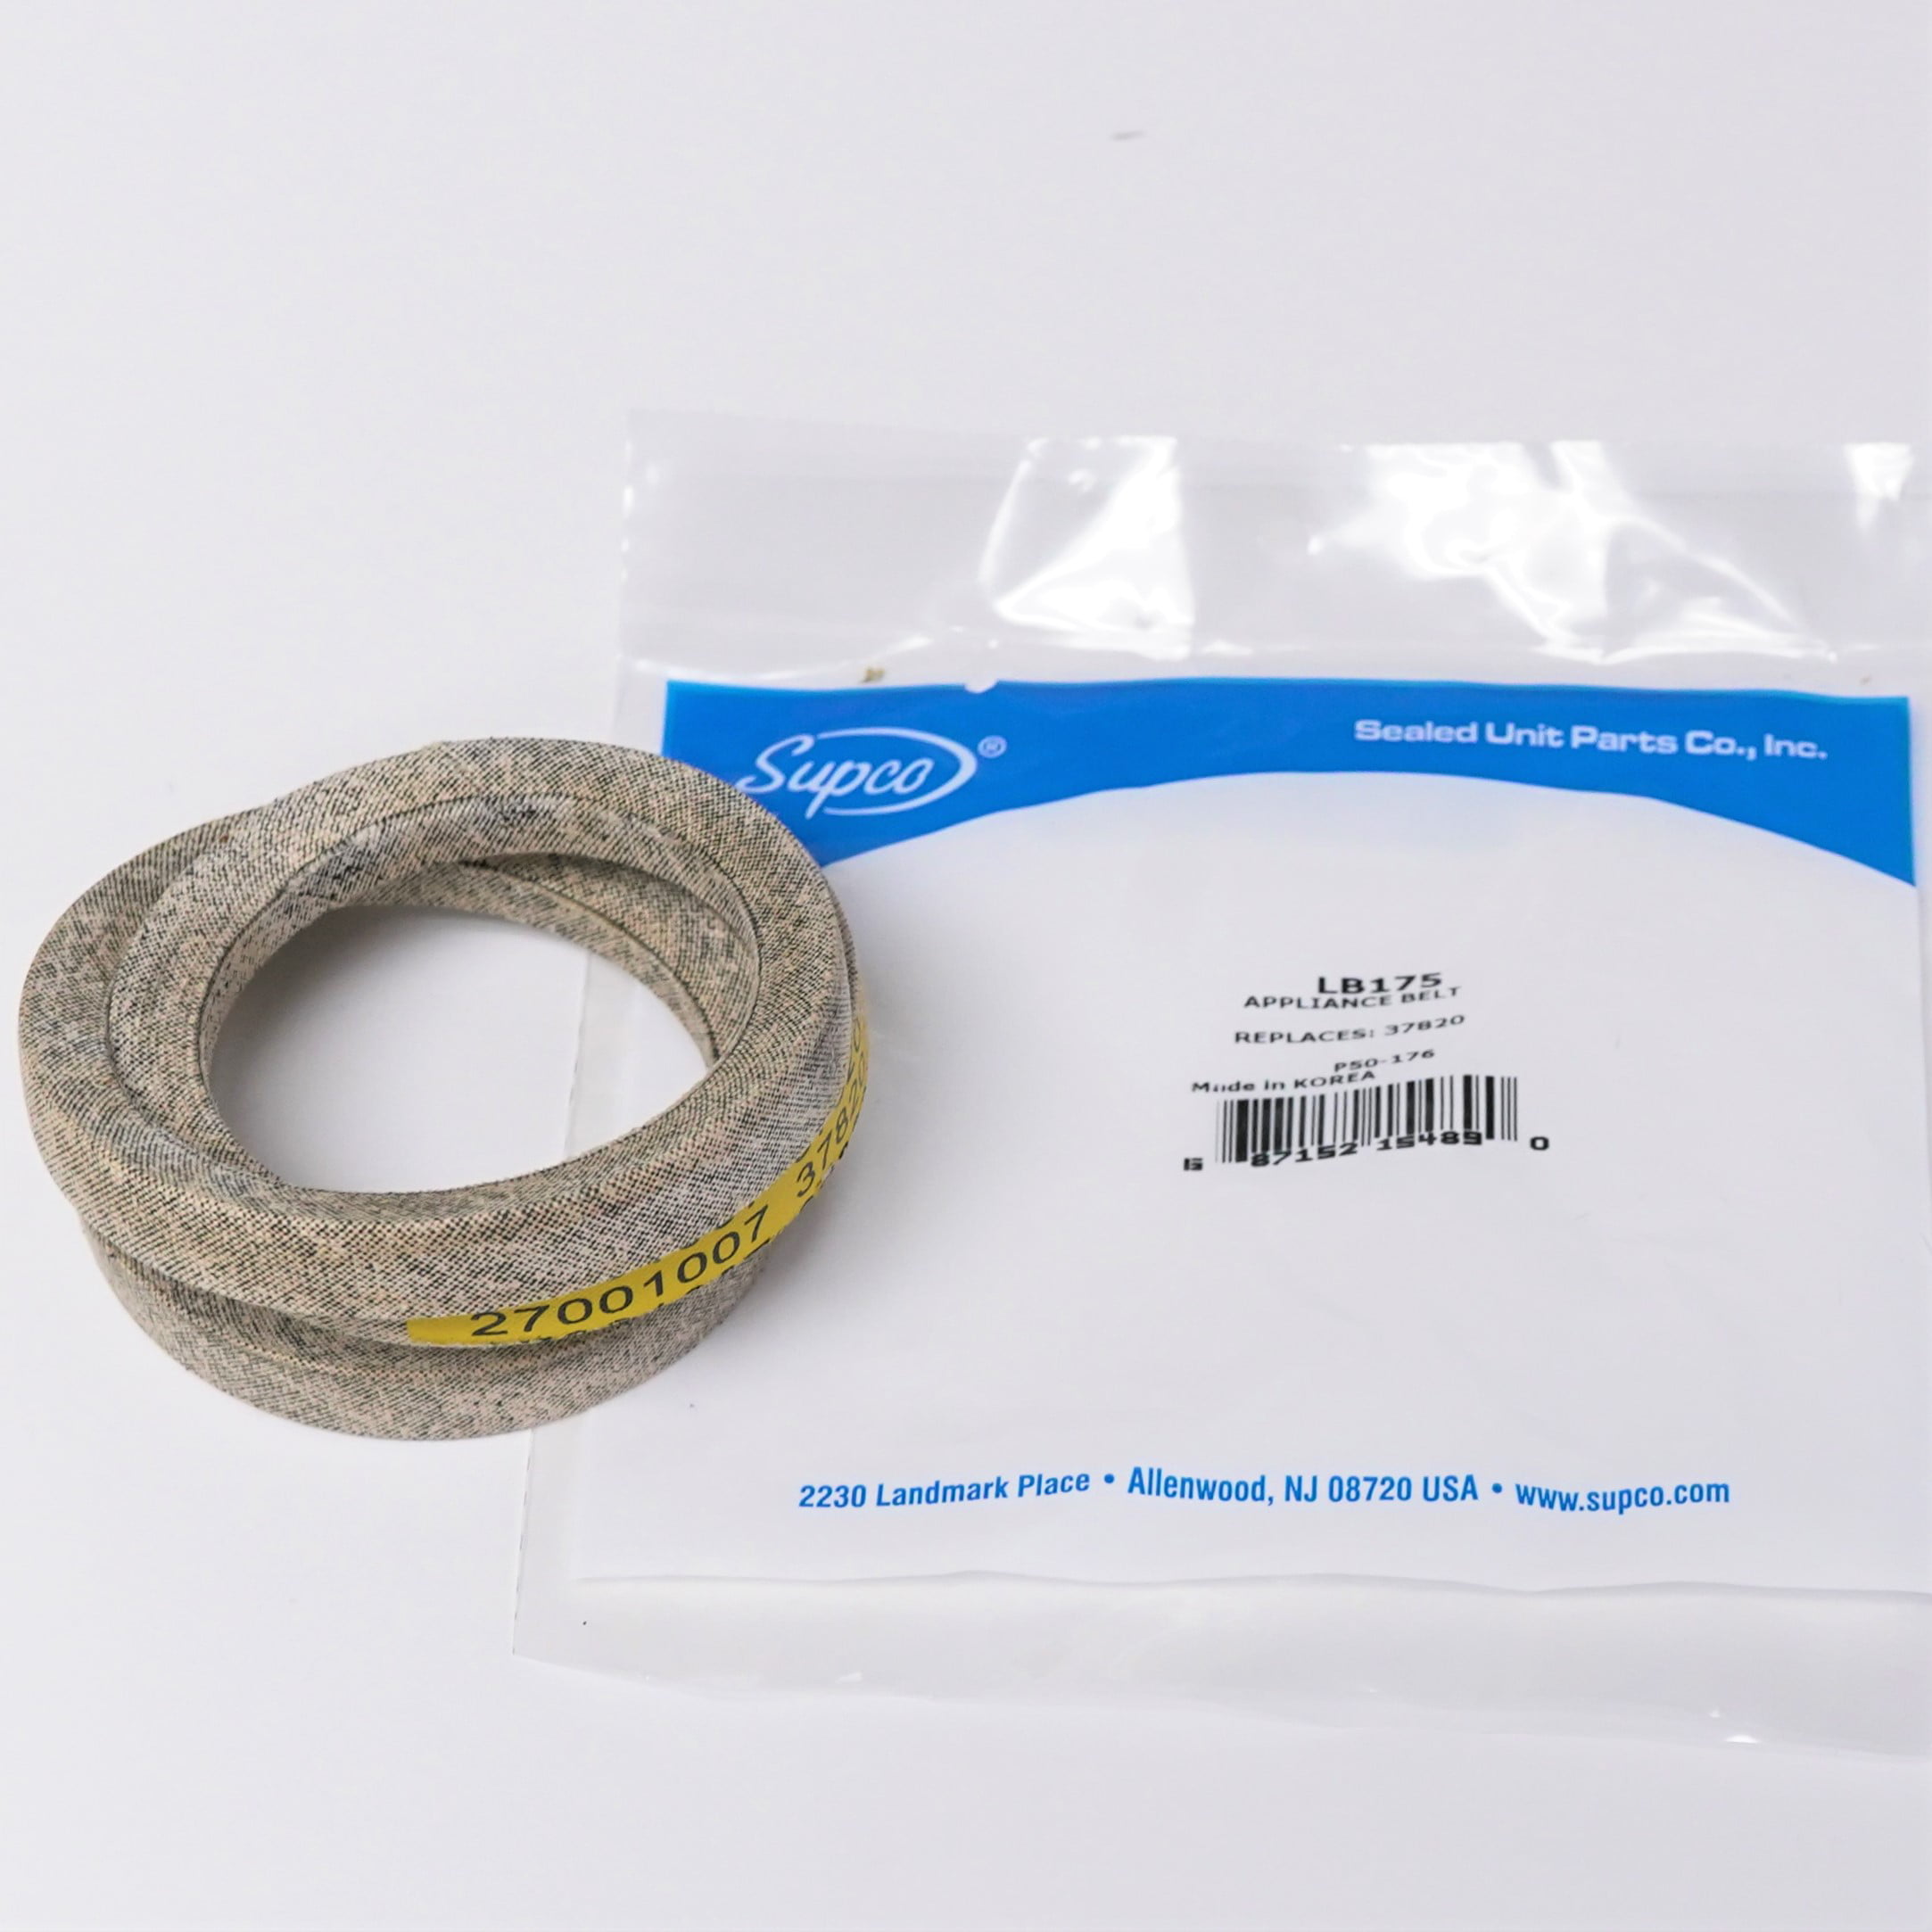 Amana ALW110RAW + 27001007 Whirlpool 37820 Washer Belt for Maytag Details about   WP27001007 